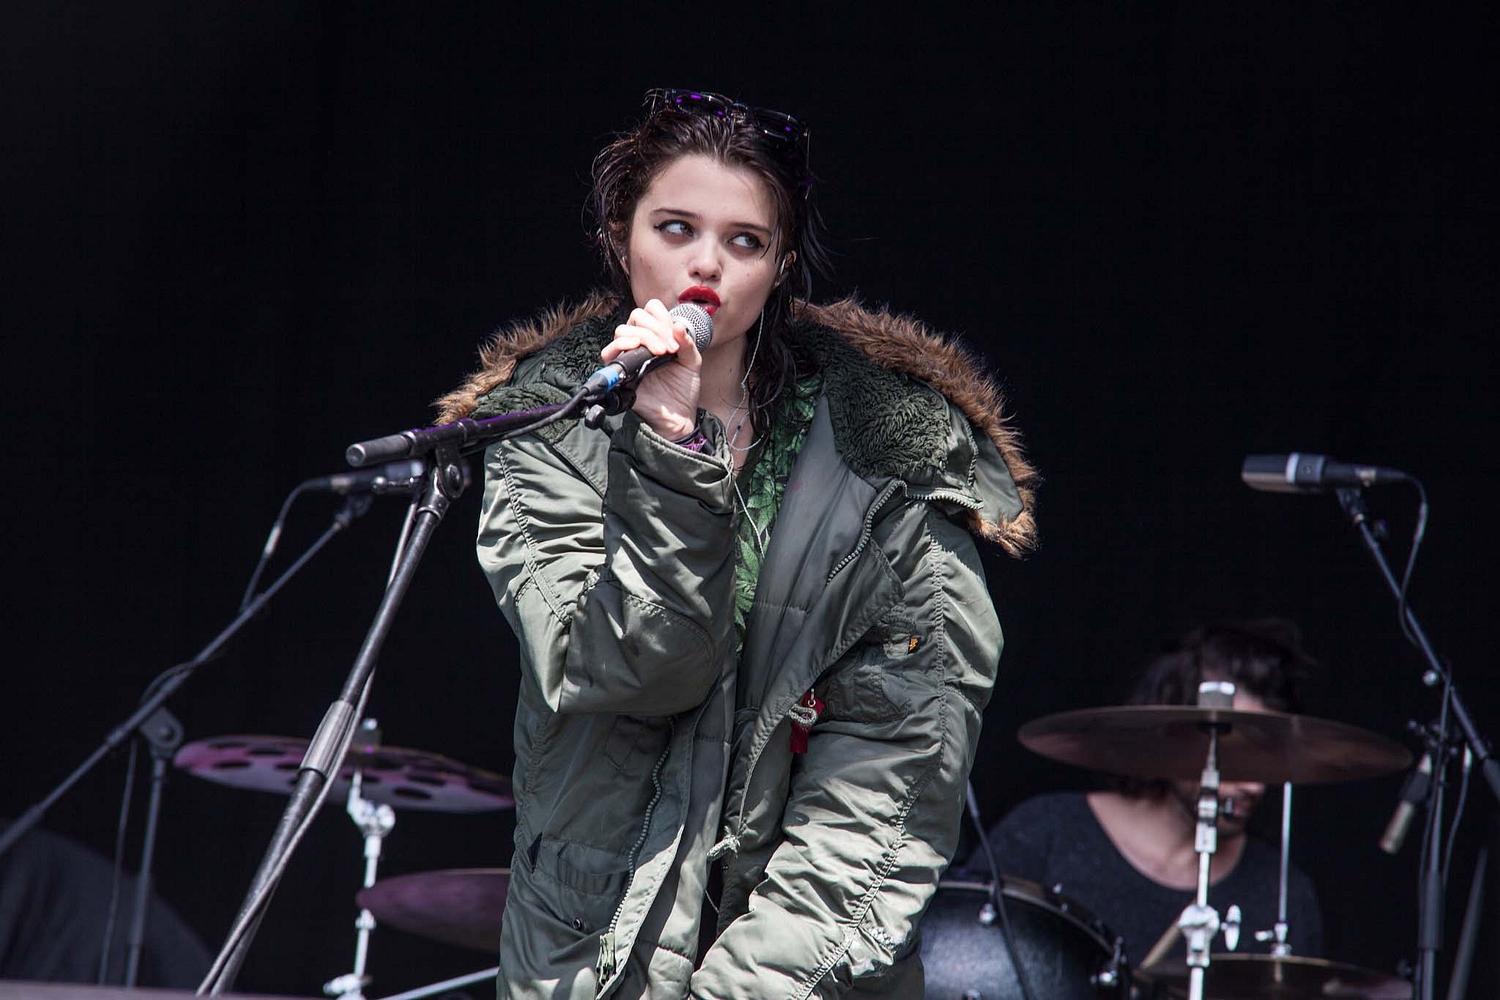 Sky Ferreira and TV On The Radio among acts playing at Standing Rock benefit